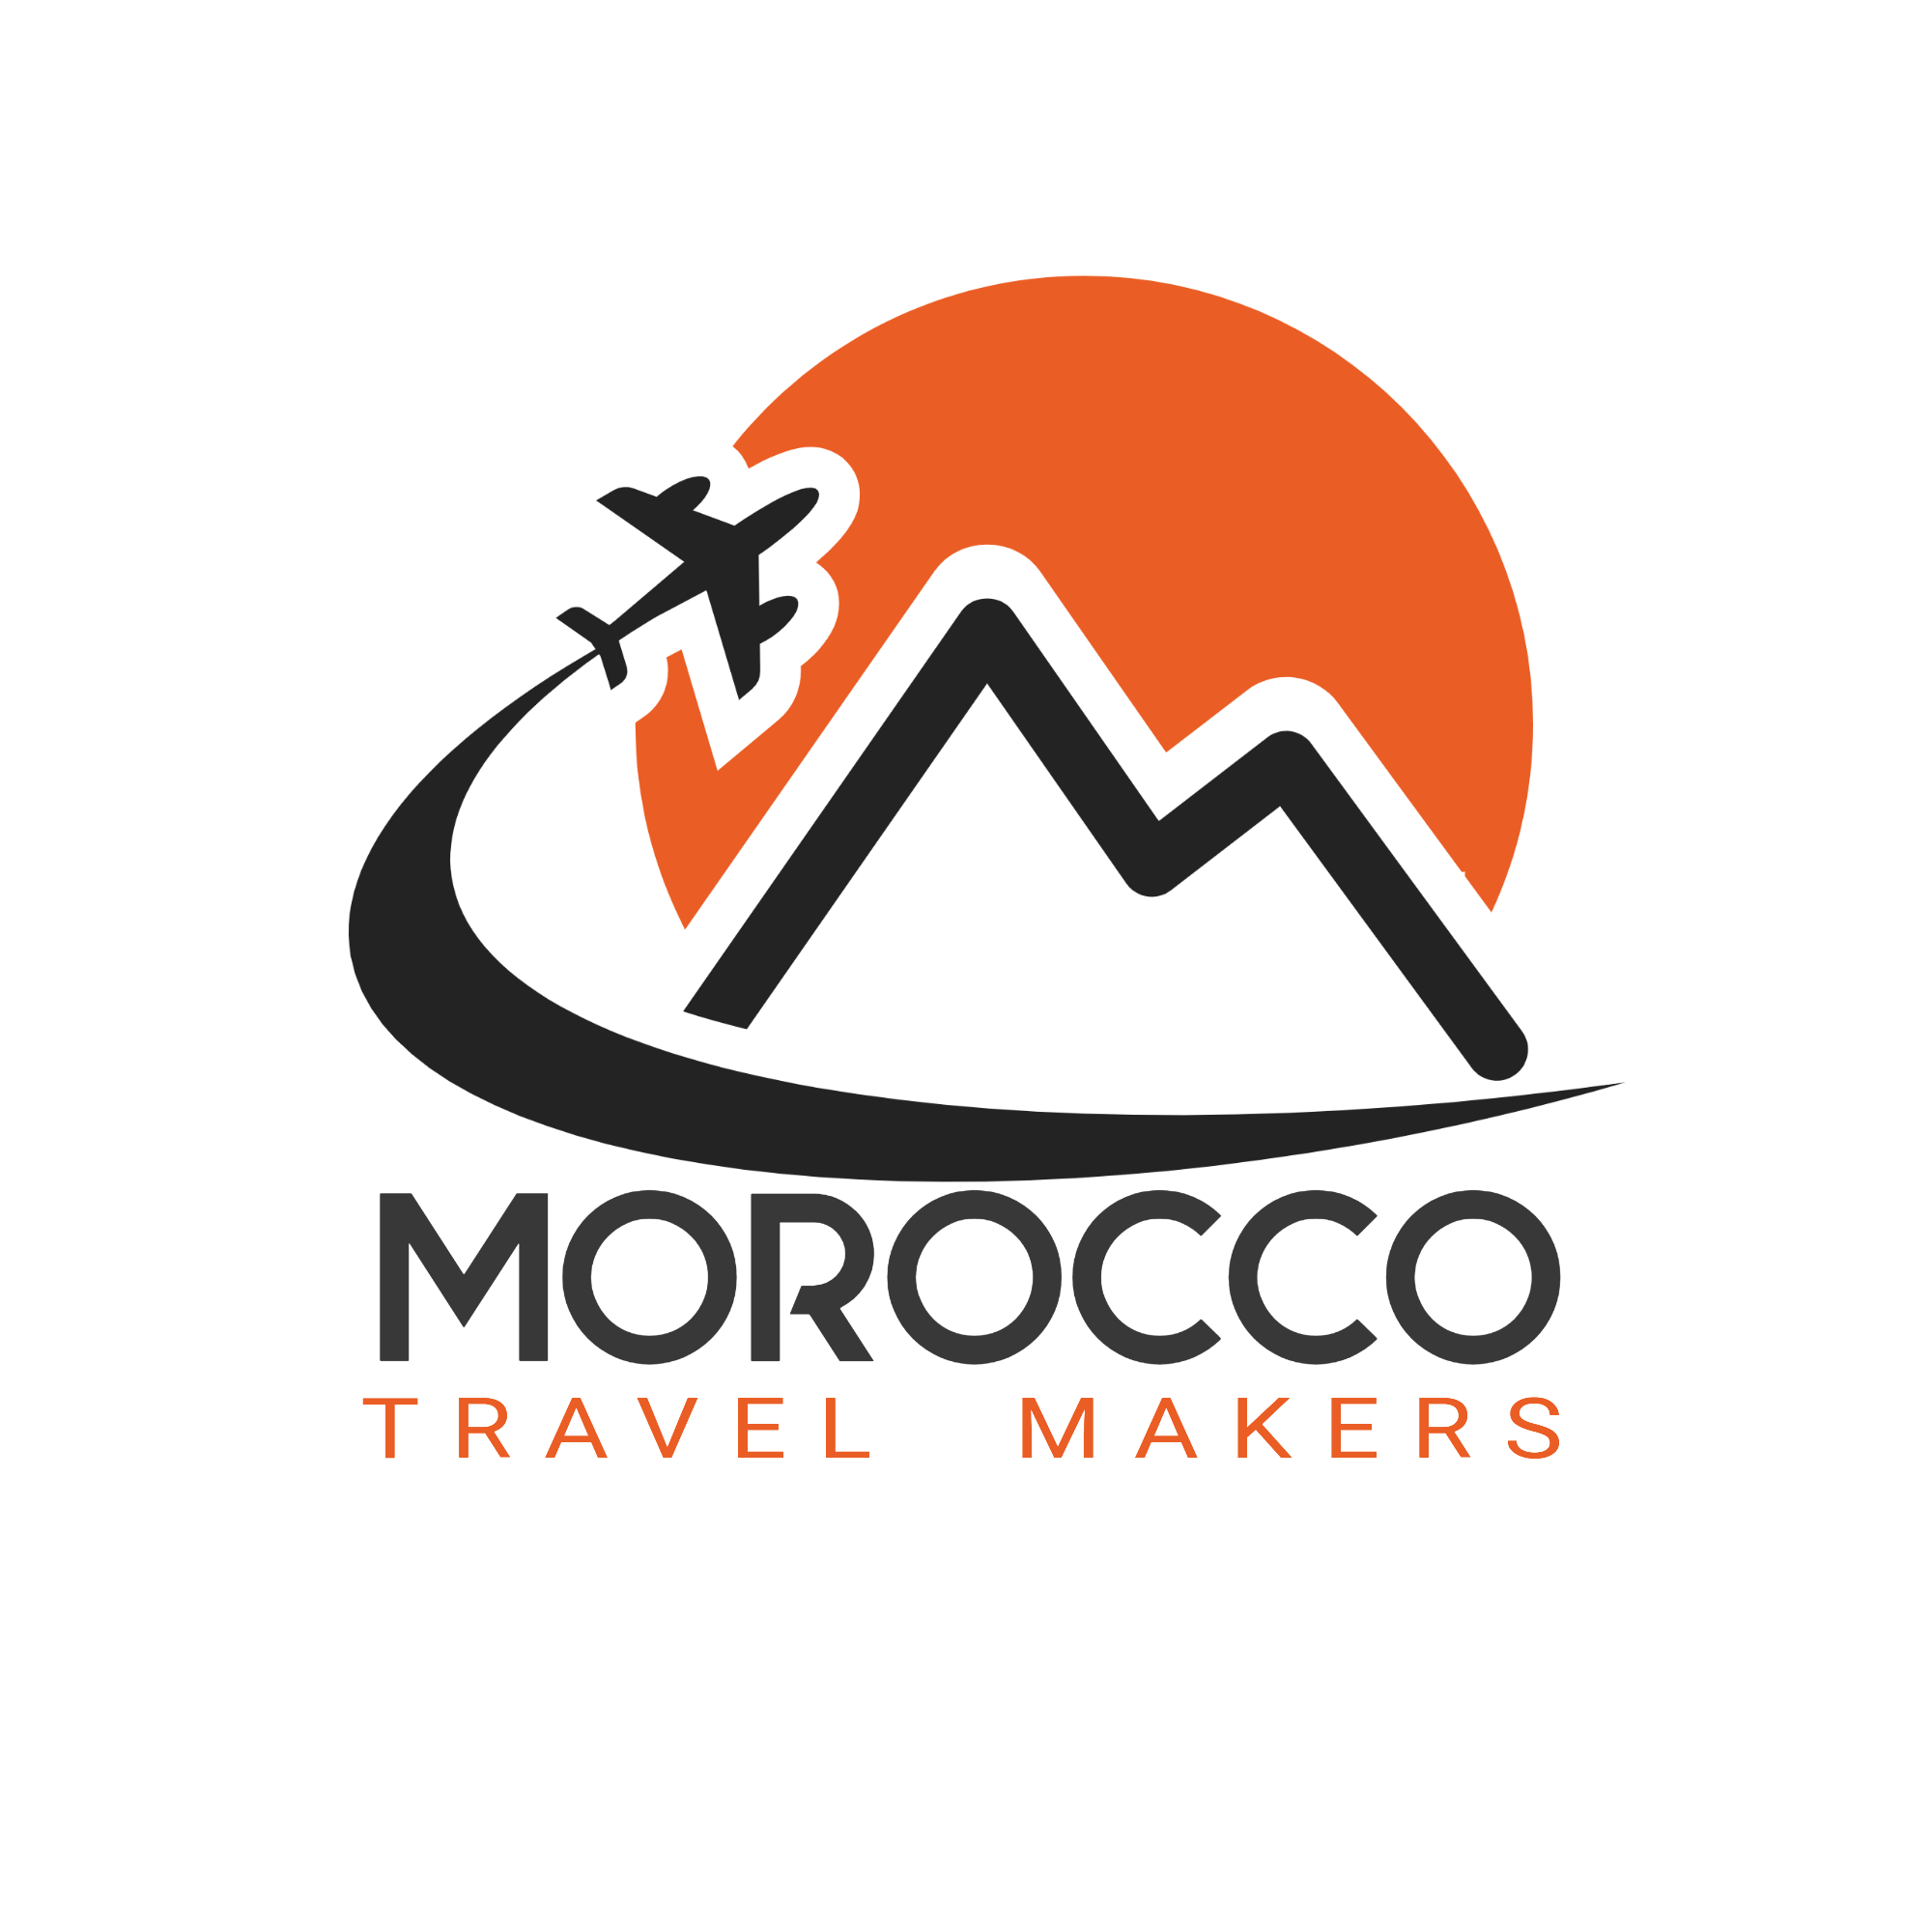 https://www.moroccotravelmakers.com/wp-content/uploads/2021/06/4.png